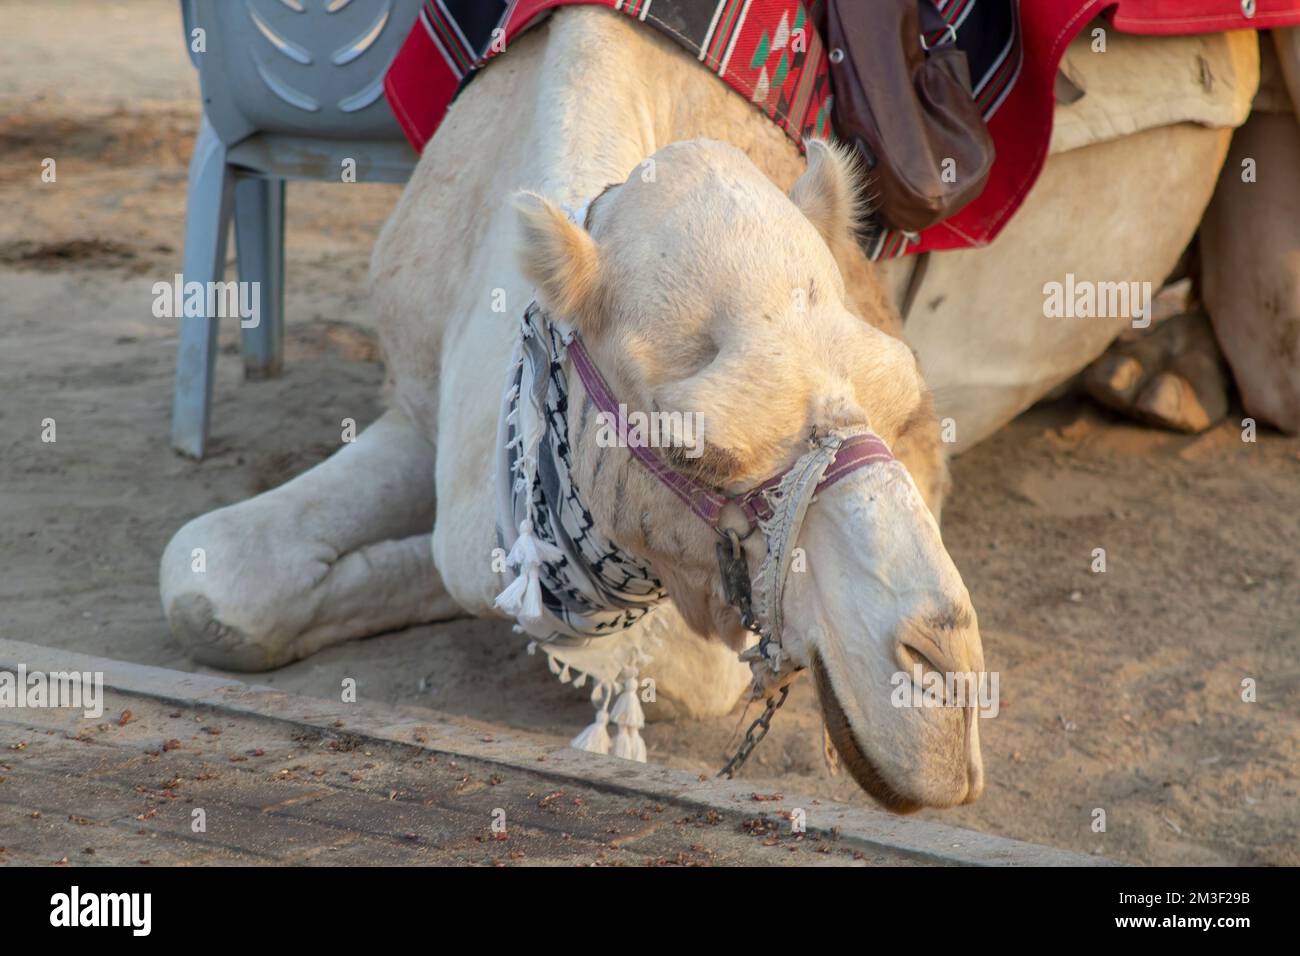 A close up of an Arabian Camel's head and face as it kneels in a resting position between tourist rides near the Dead Sea in Israel Stock Photo